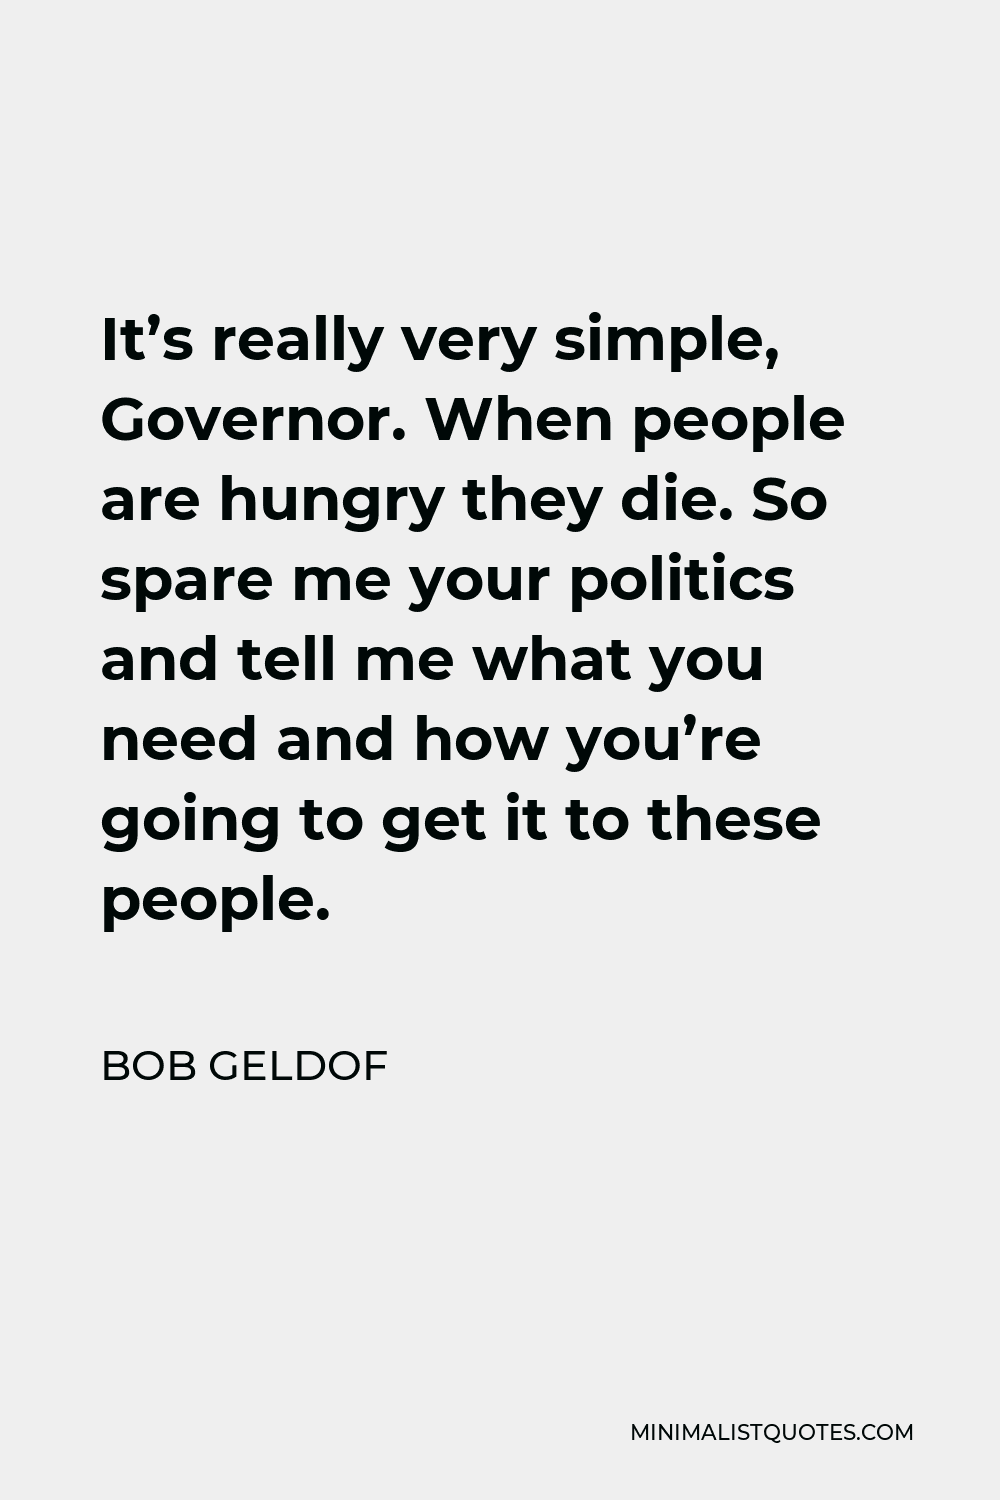 Bob Geldof Quote - It’s really very simple, Governor. When people are hungry they die. So spare me your politics and tell me what you need and how you’re going to get it to these people.